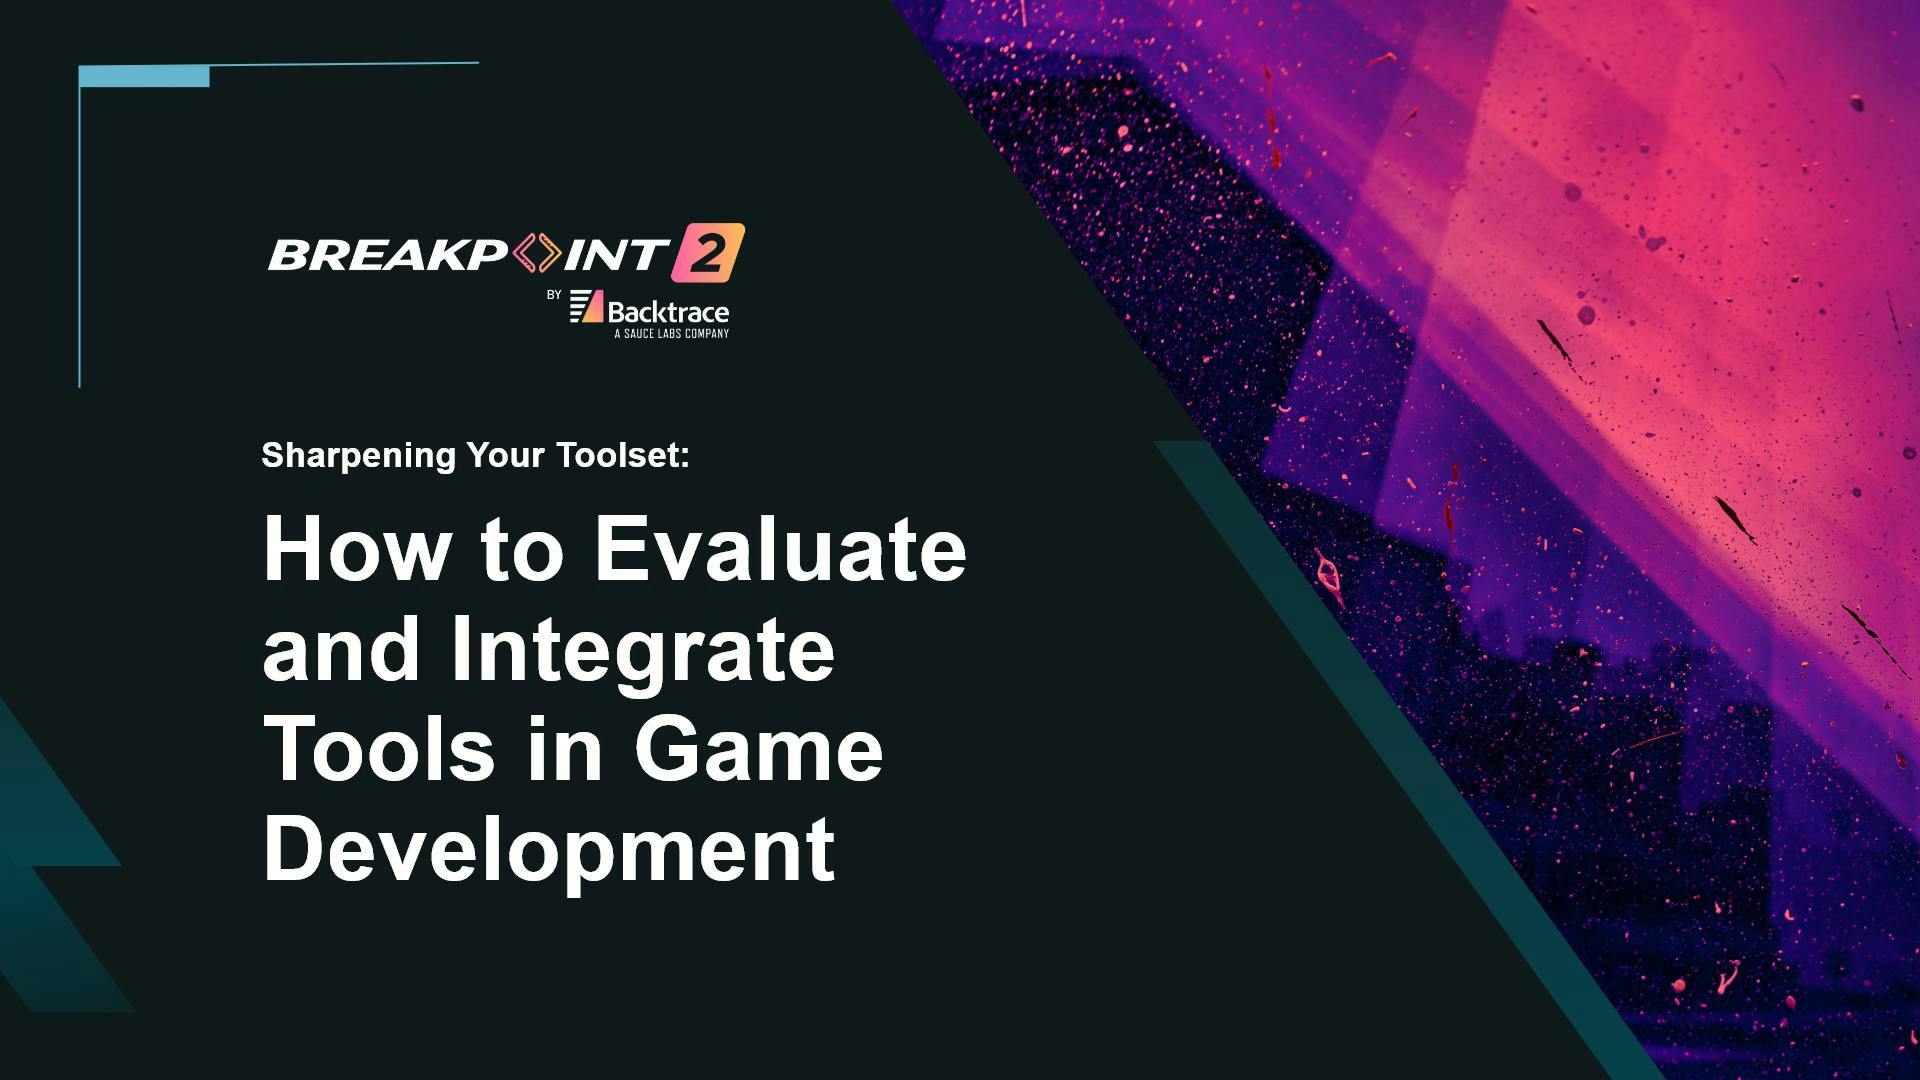 Sharpening Your Toolset: How to Evaluate and Integrate Tools in Game Development